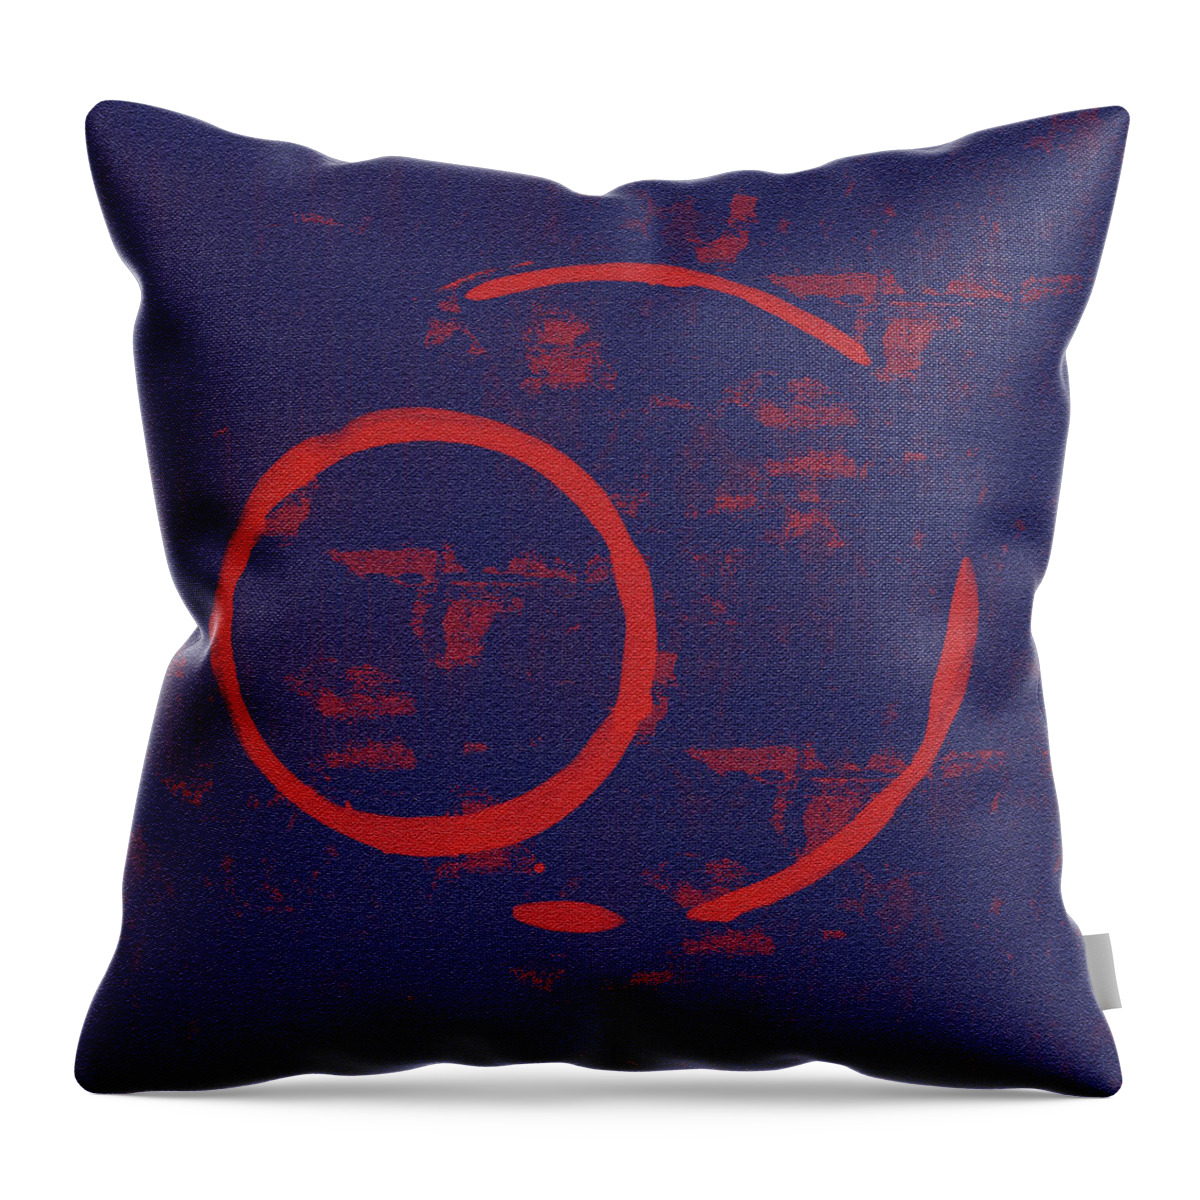 Red Throw Pillow featuring the painting Eclipse by Julie Niemela